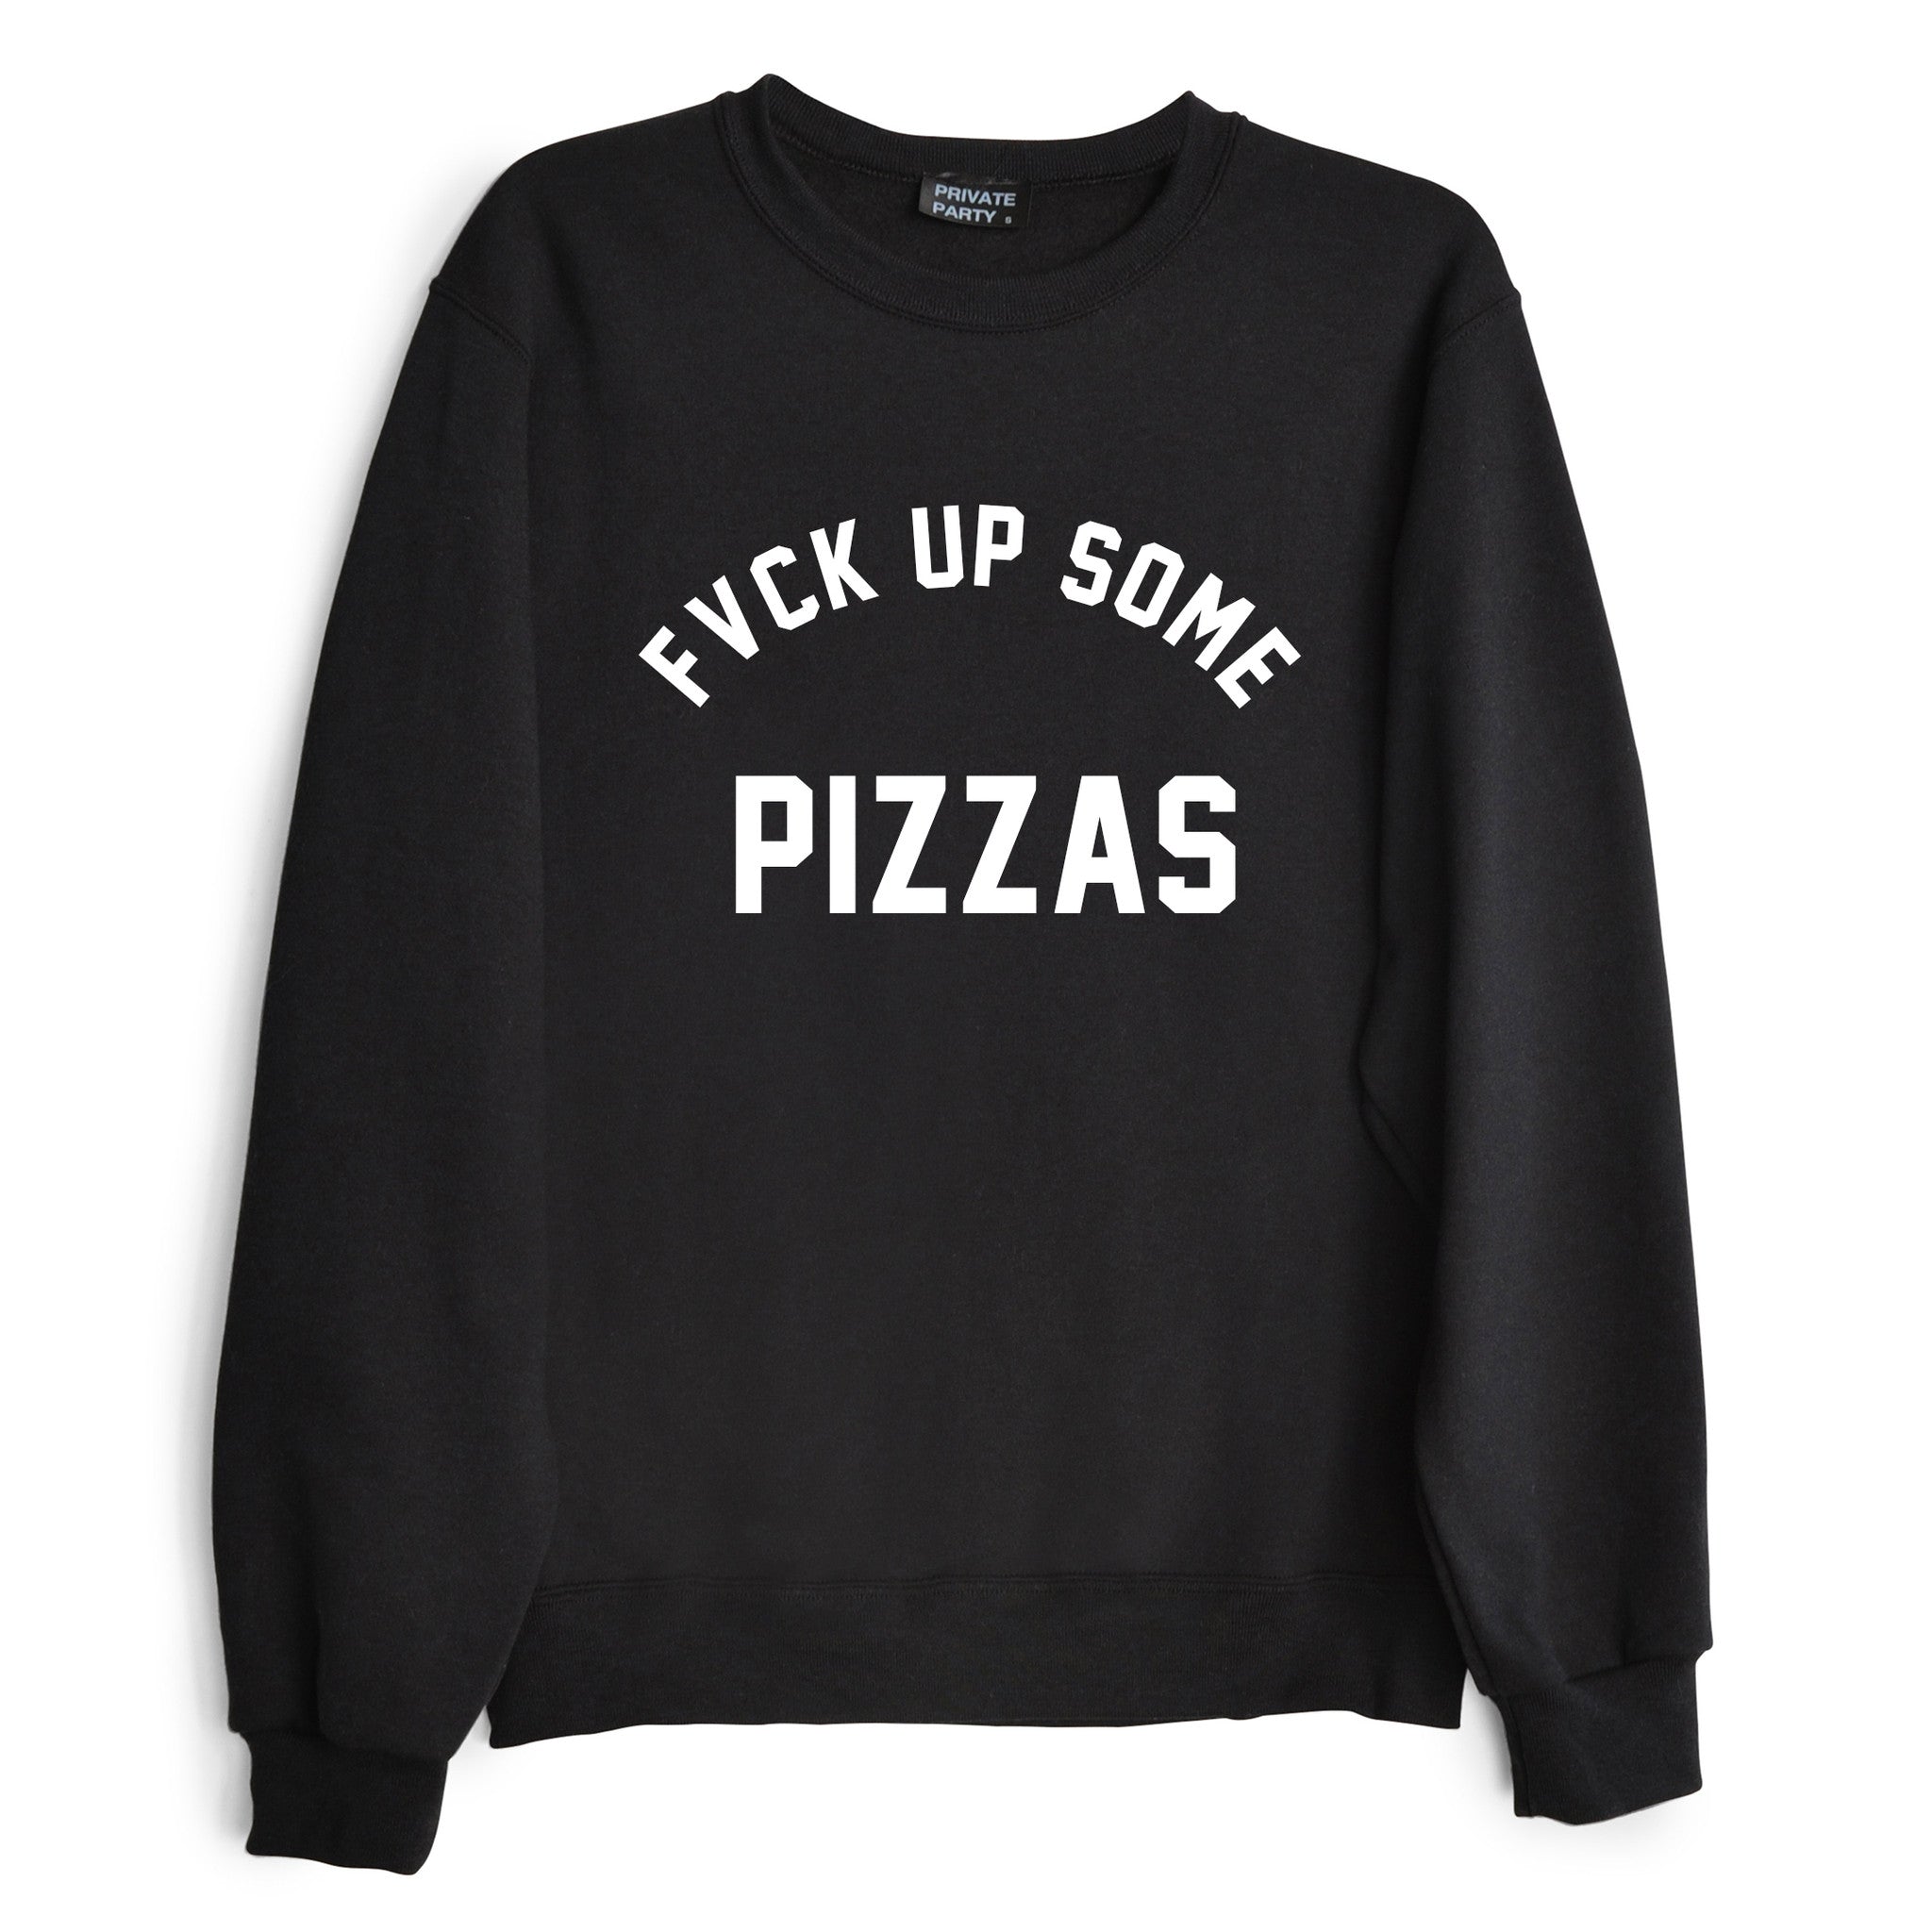 FVCK UP SOME PIZZAS [SWEATSHIRT]